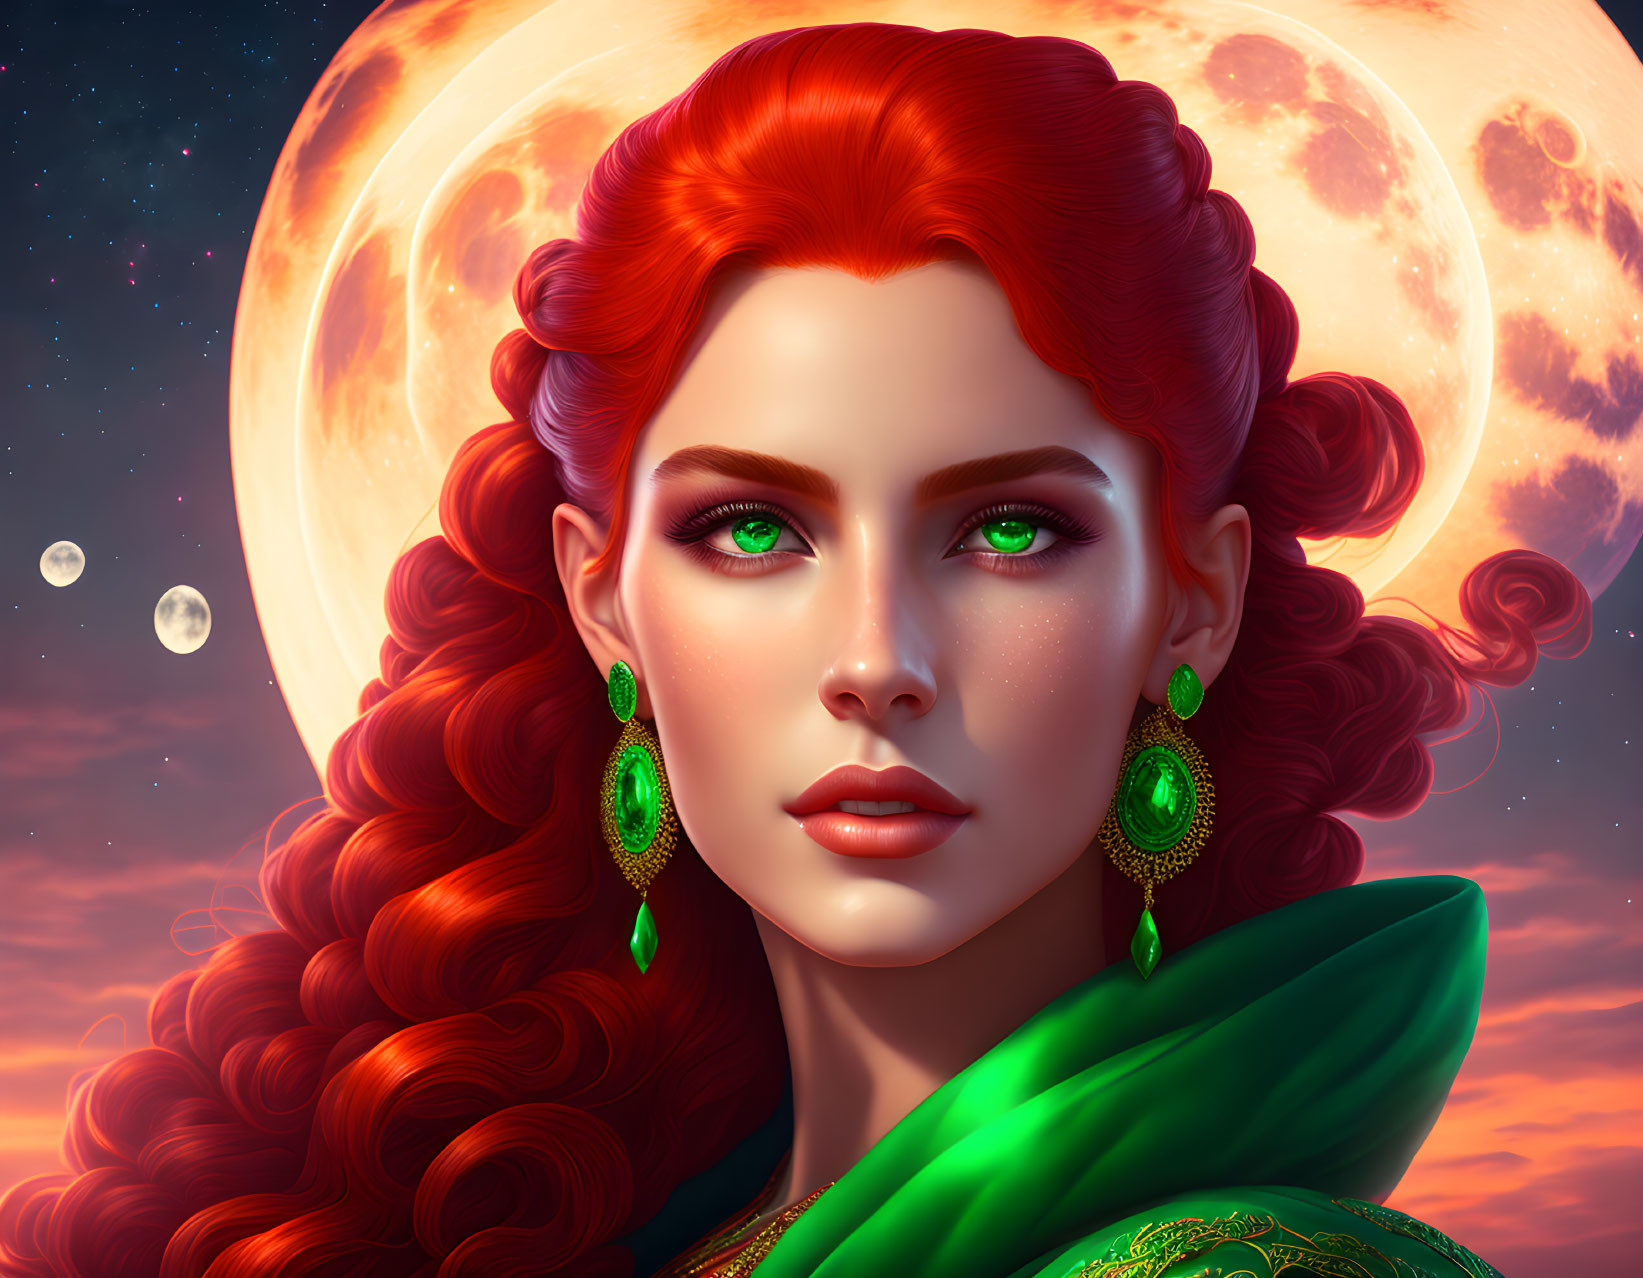 Digital portrait of woman with red hair and green eyes against moon and stars